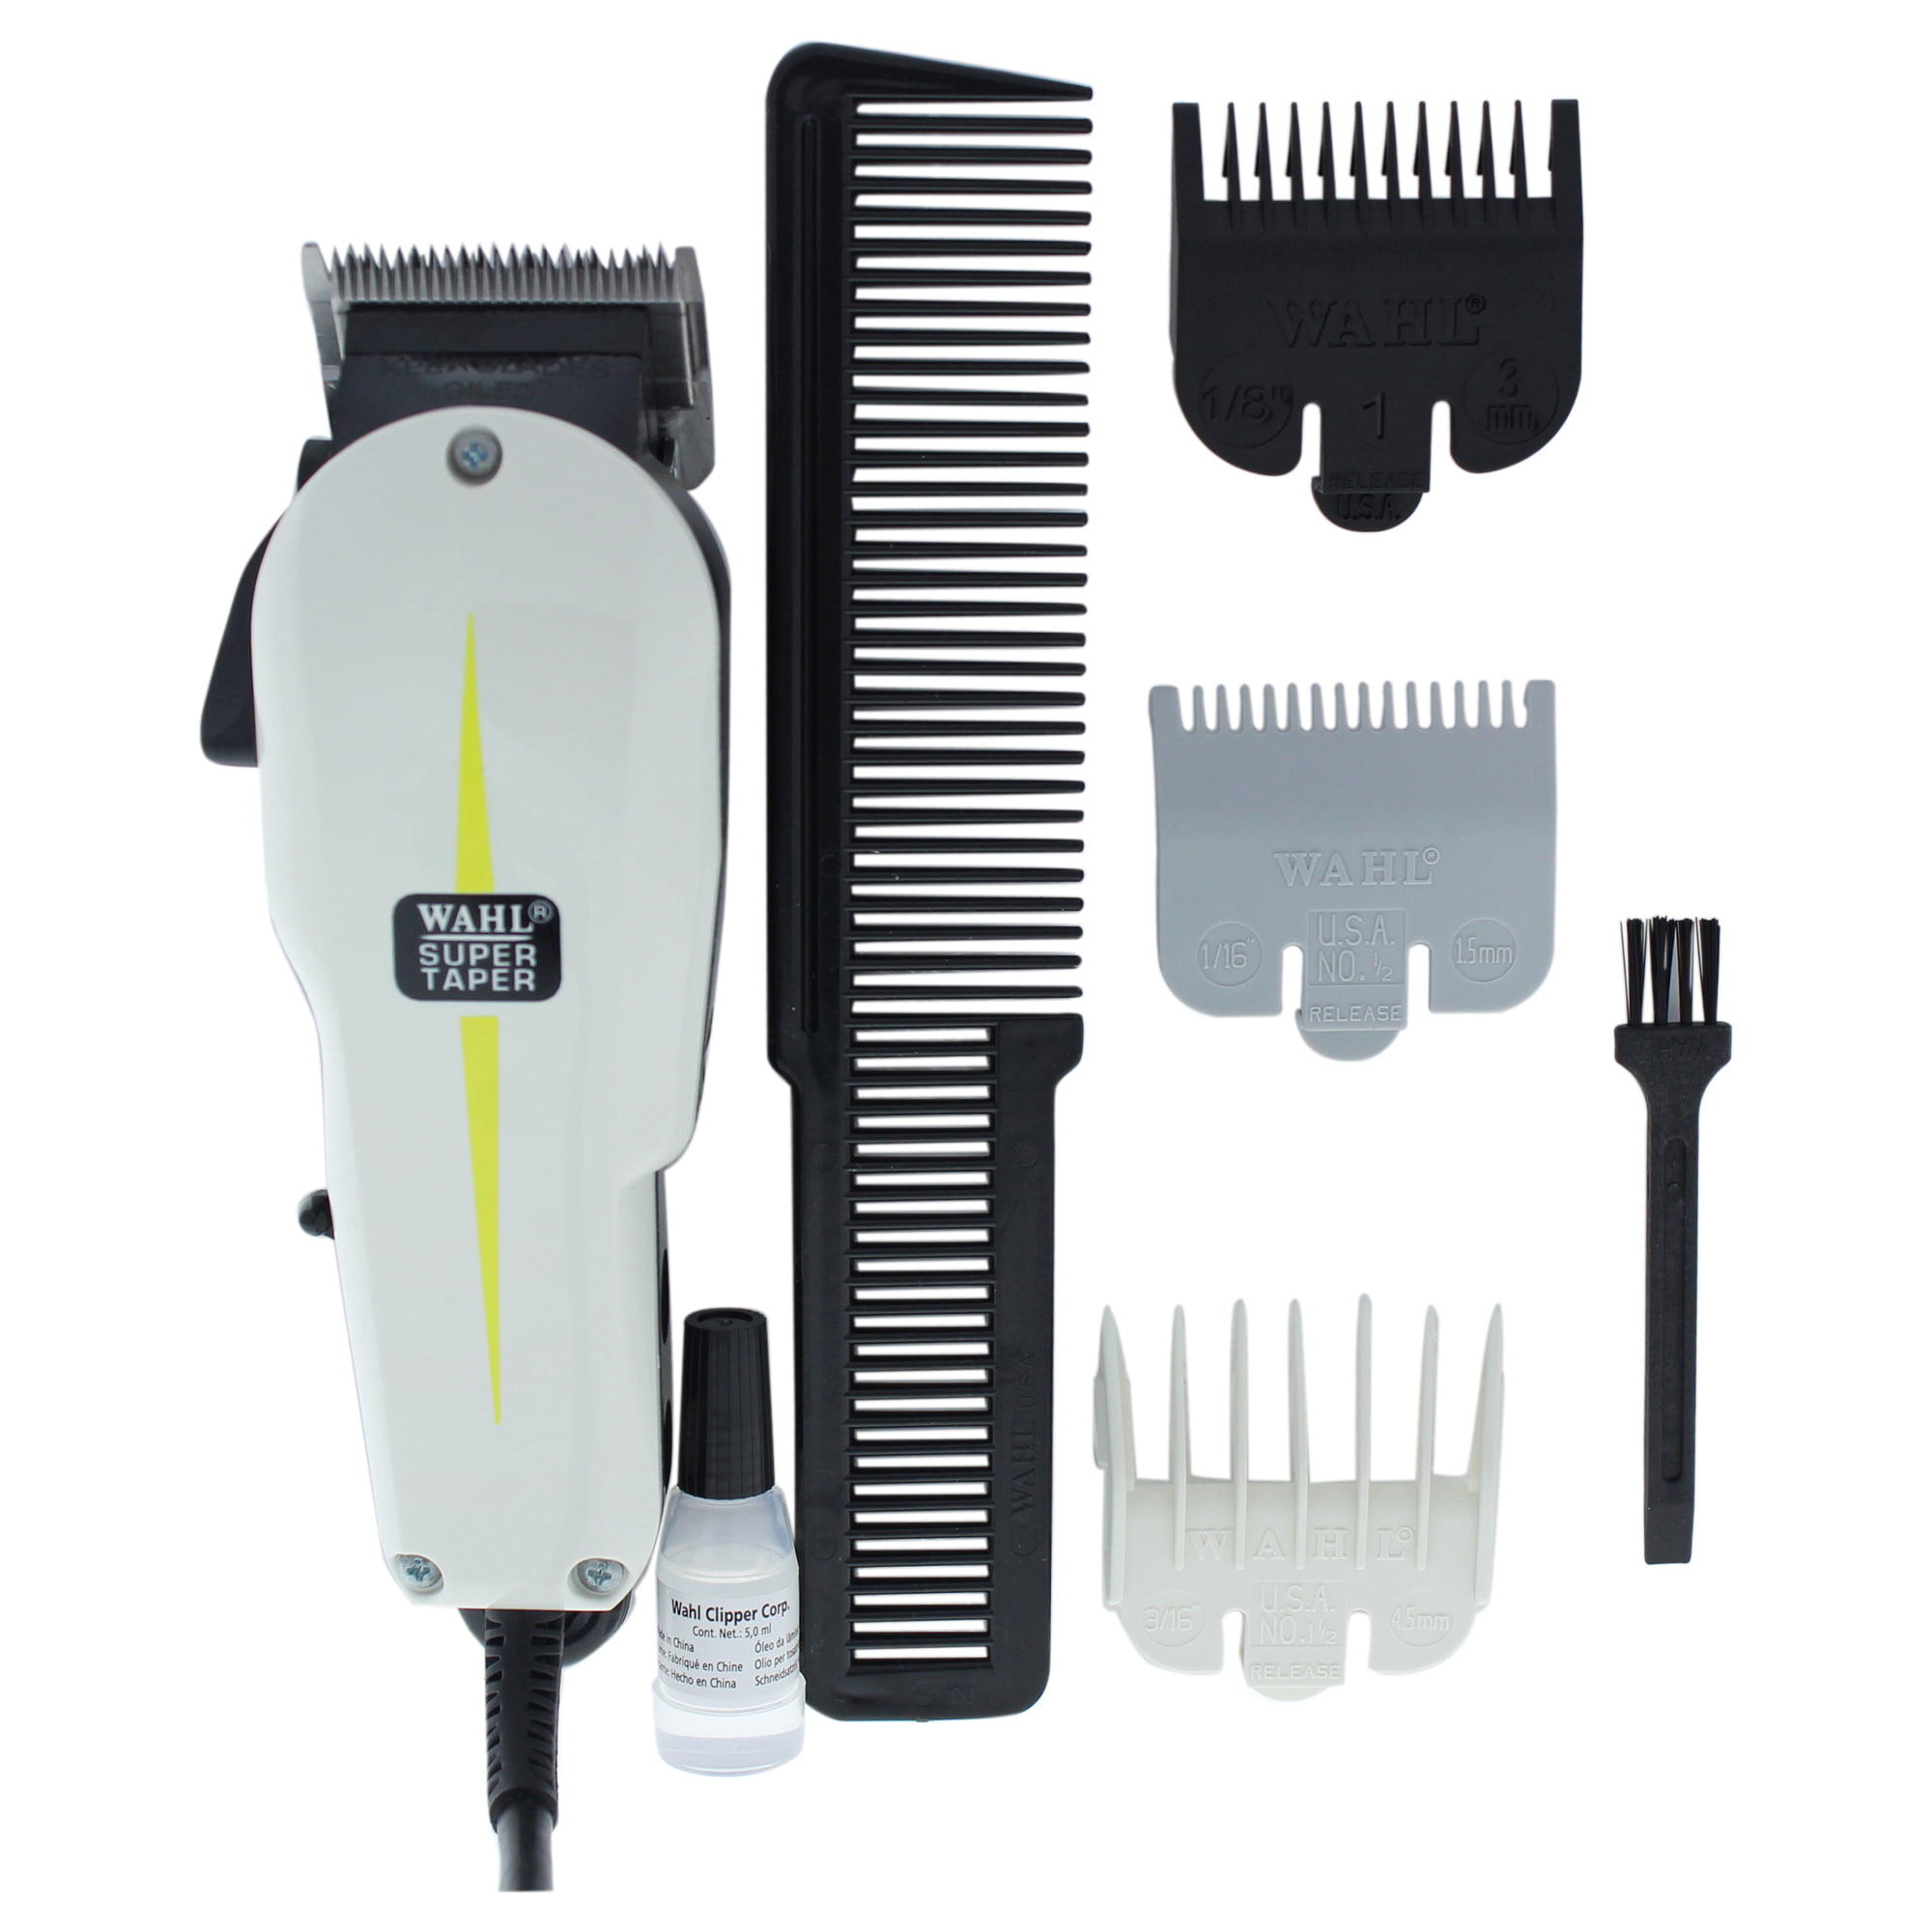 Wahl Super Taper, Professional hair cutting clipper with cable power  supply. The clipper is reliable, powerful and very convenient for long-term  use, Manufacturer: Wahl [8463] - €69.90 : , Online Store